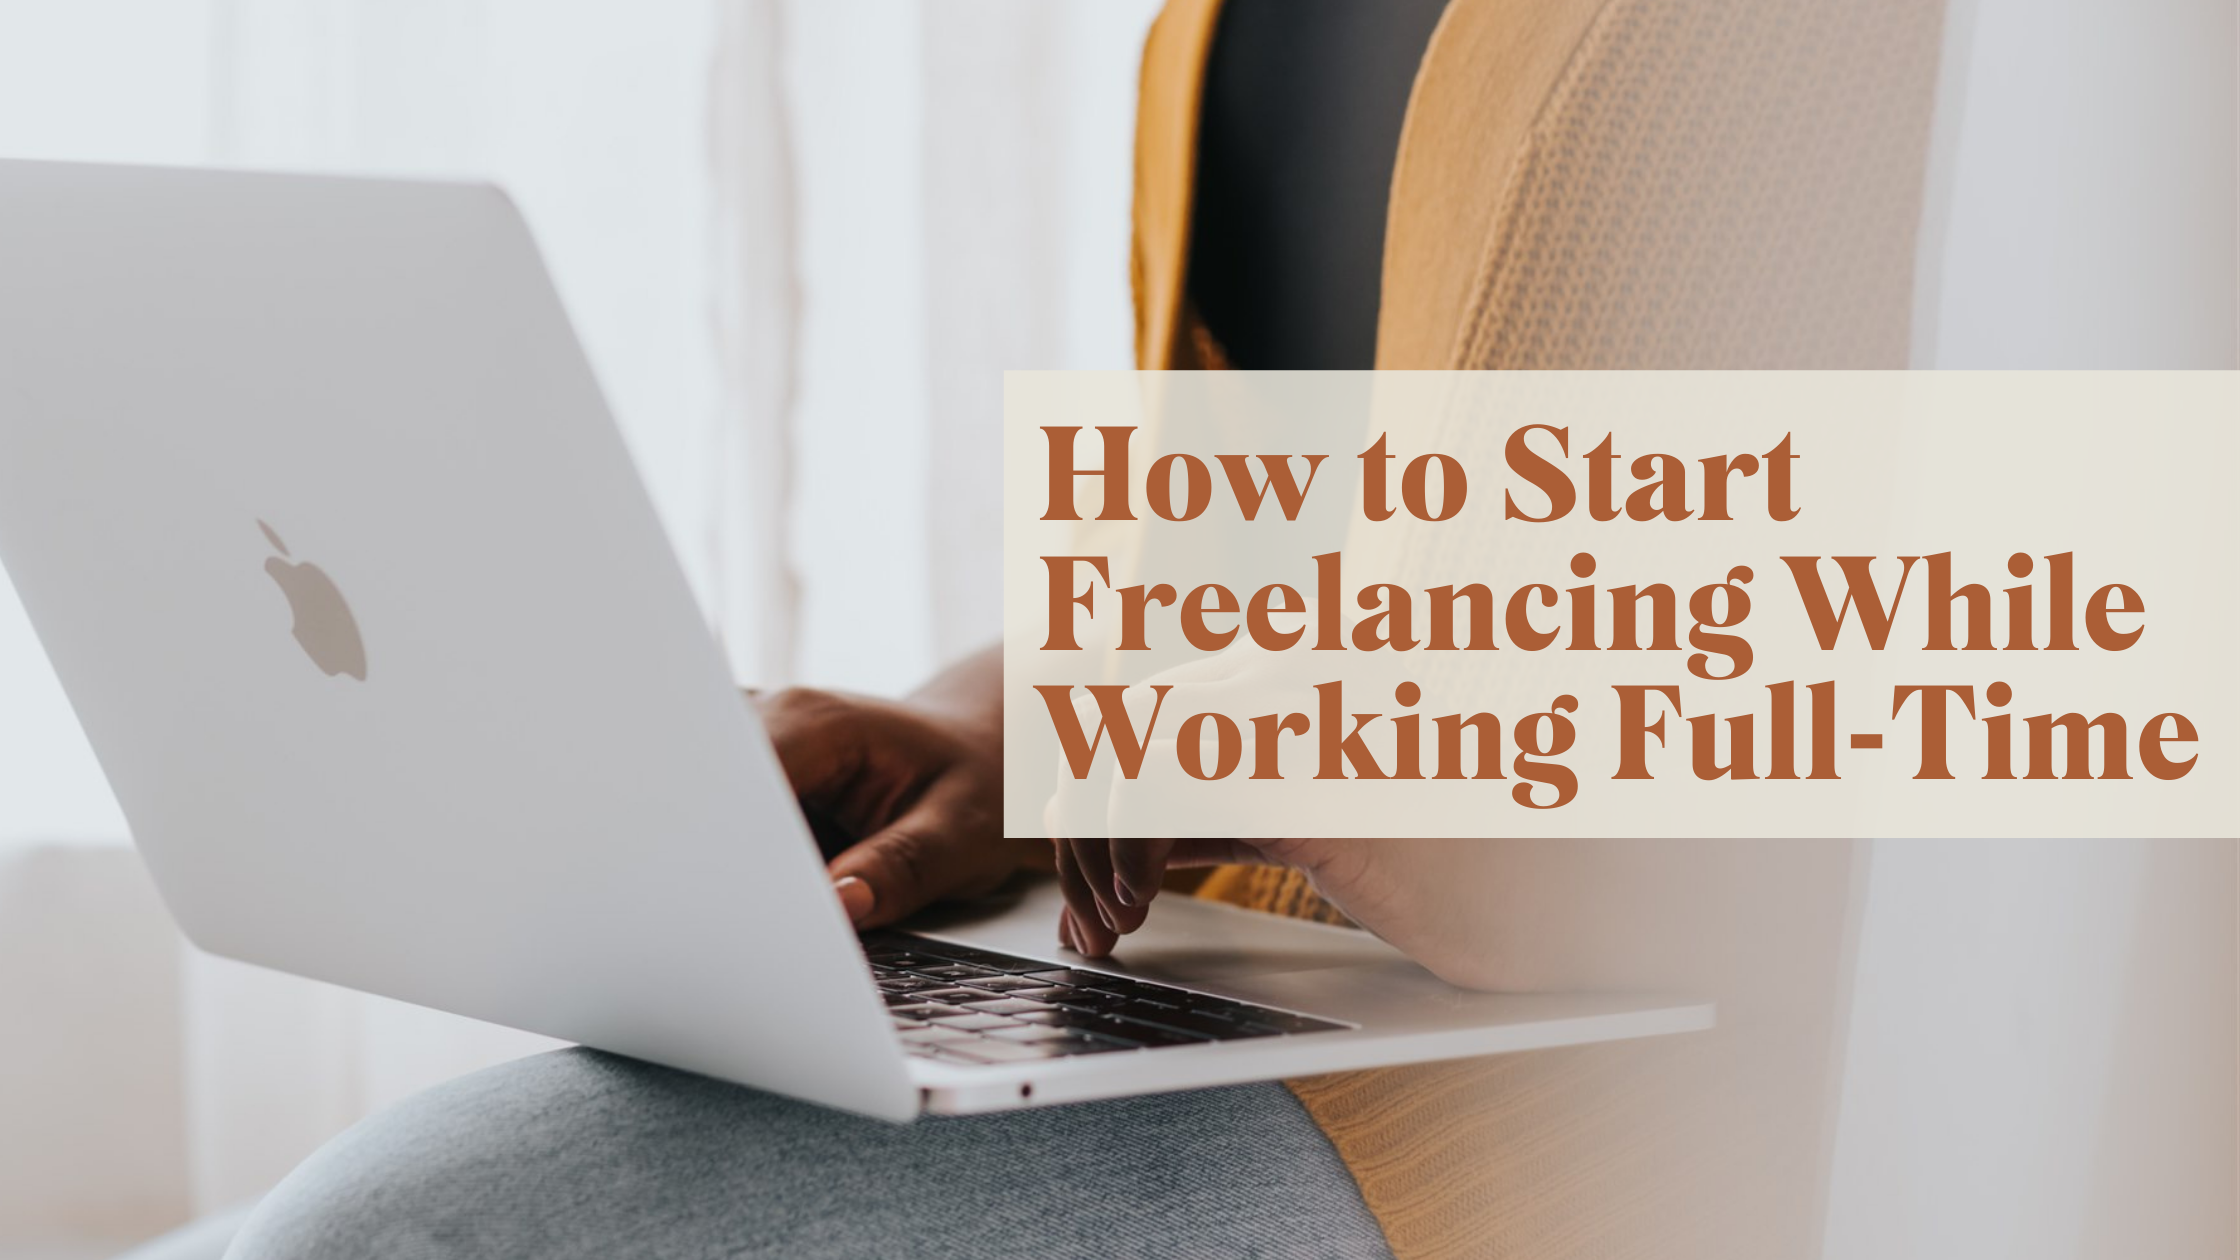 How to Start Freelancing While Working Full-Time